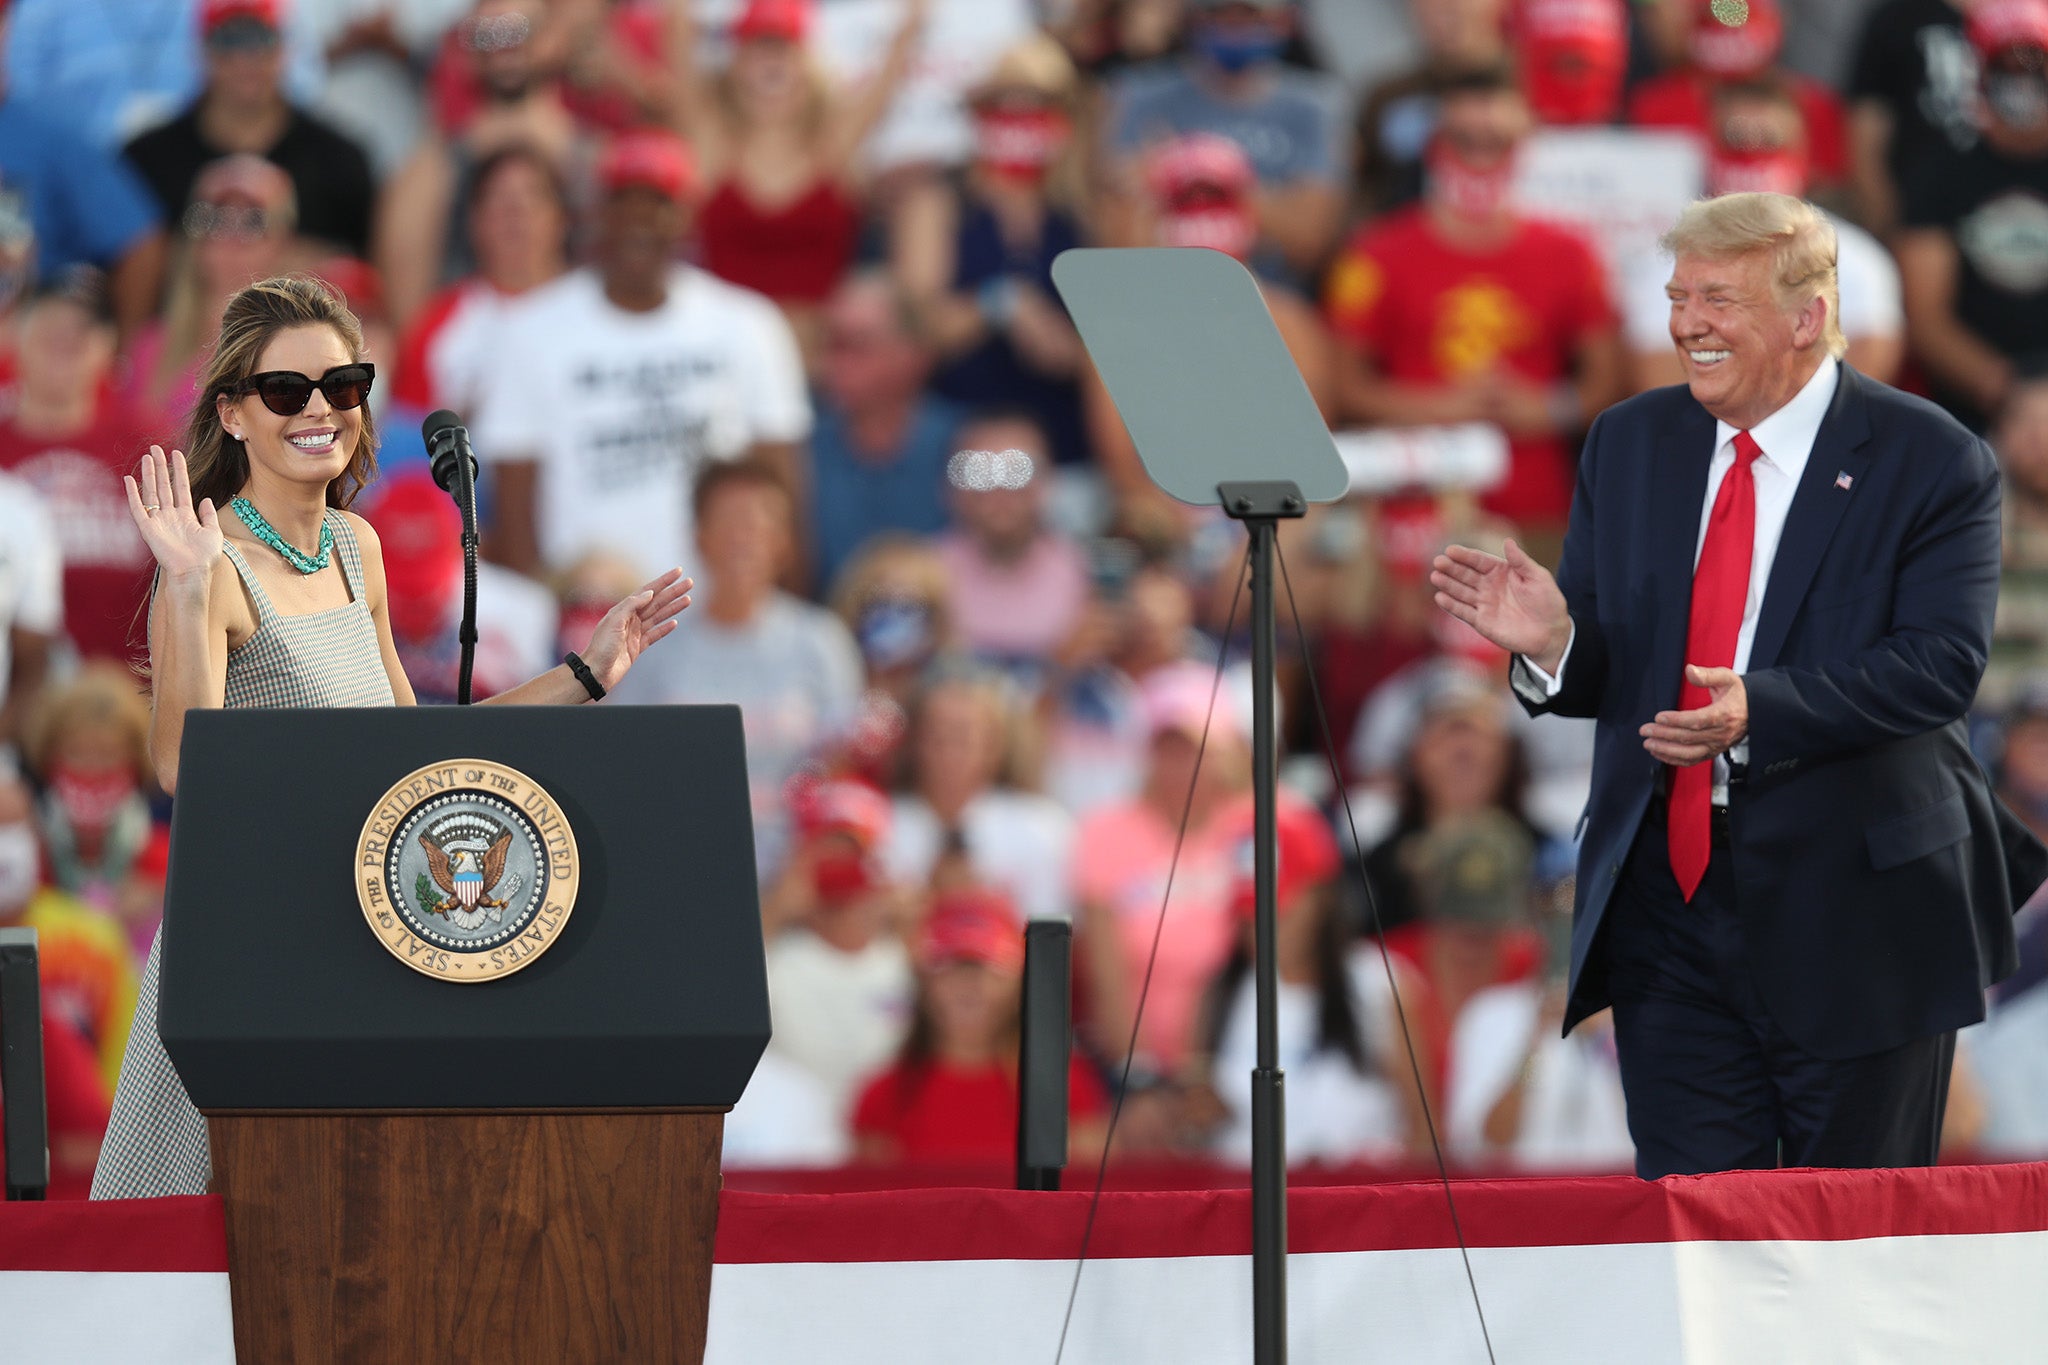 Donald Trump and Hope Hicks are pictured at a campaign rally in 2016.